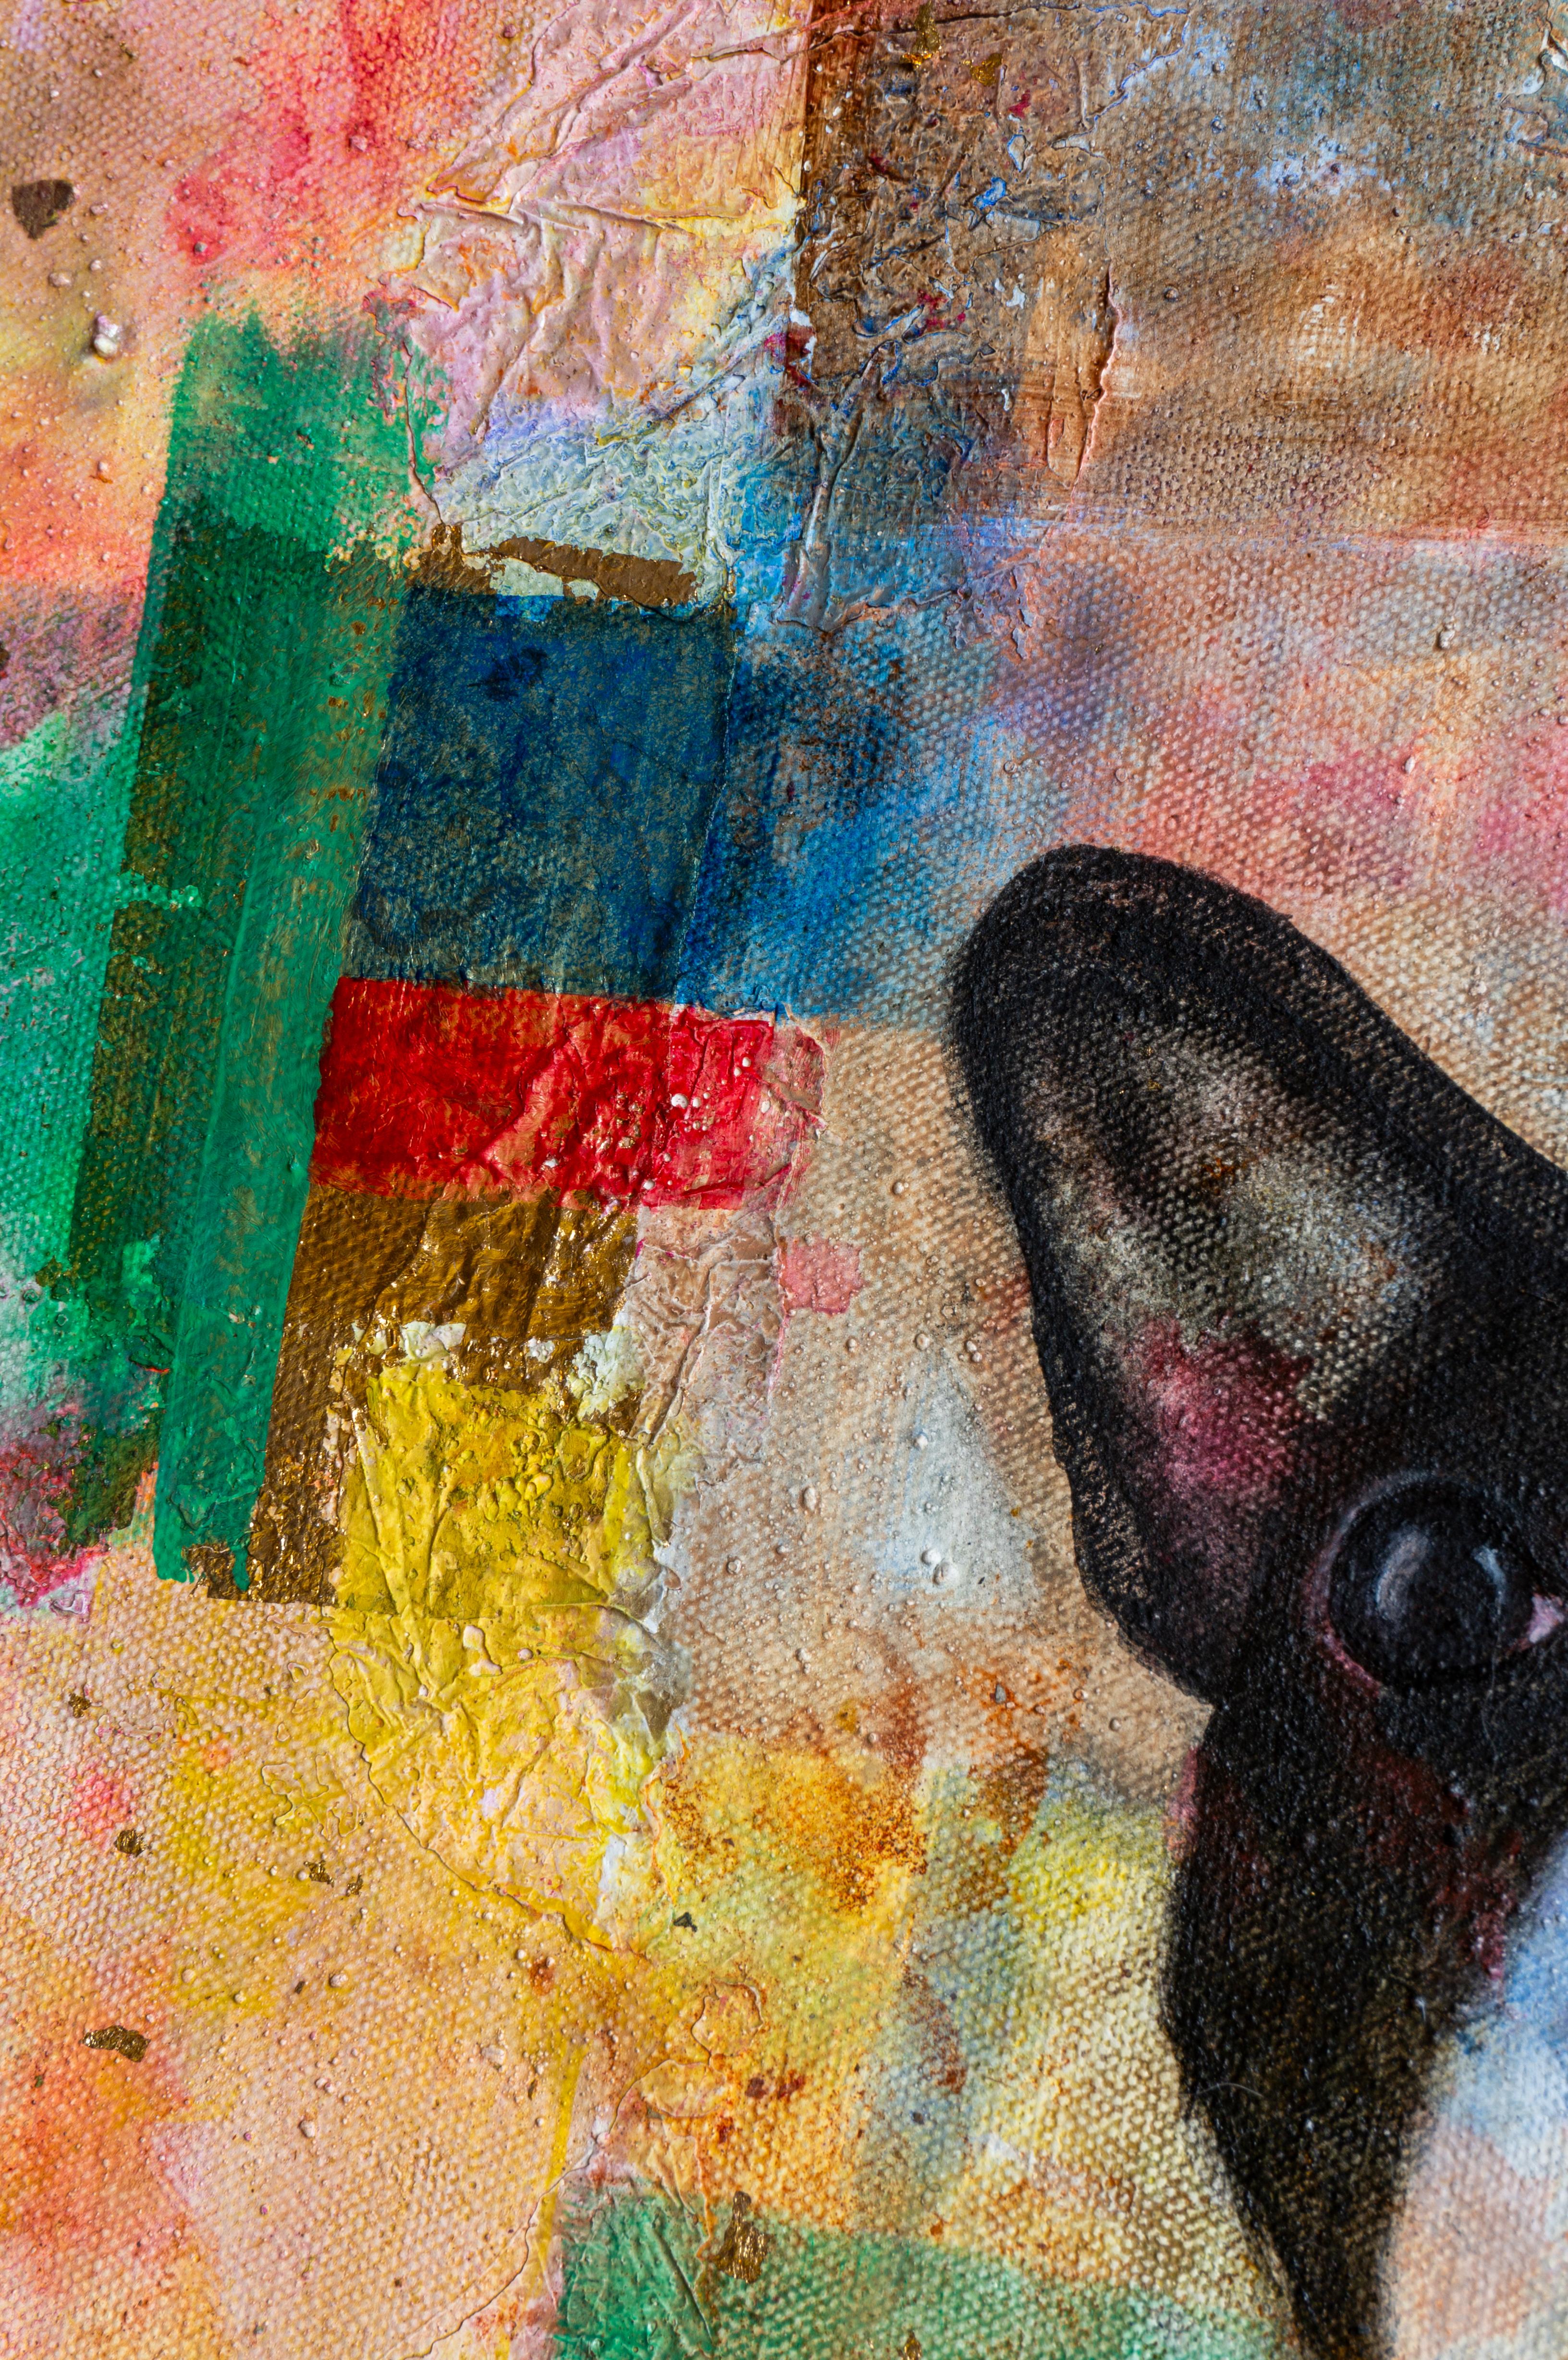 Oil painting featuring the image of an unknown French Bulldog against an abstract background of pastel tones. With dimensions of 27